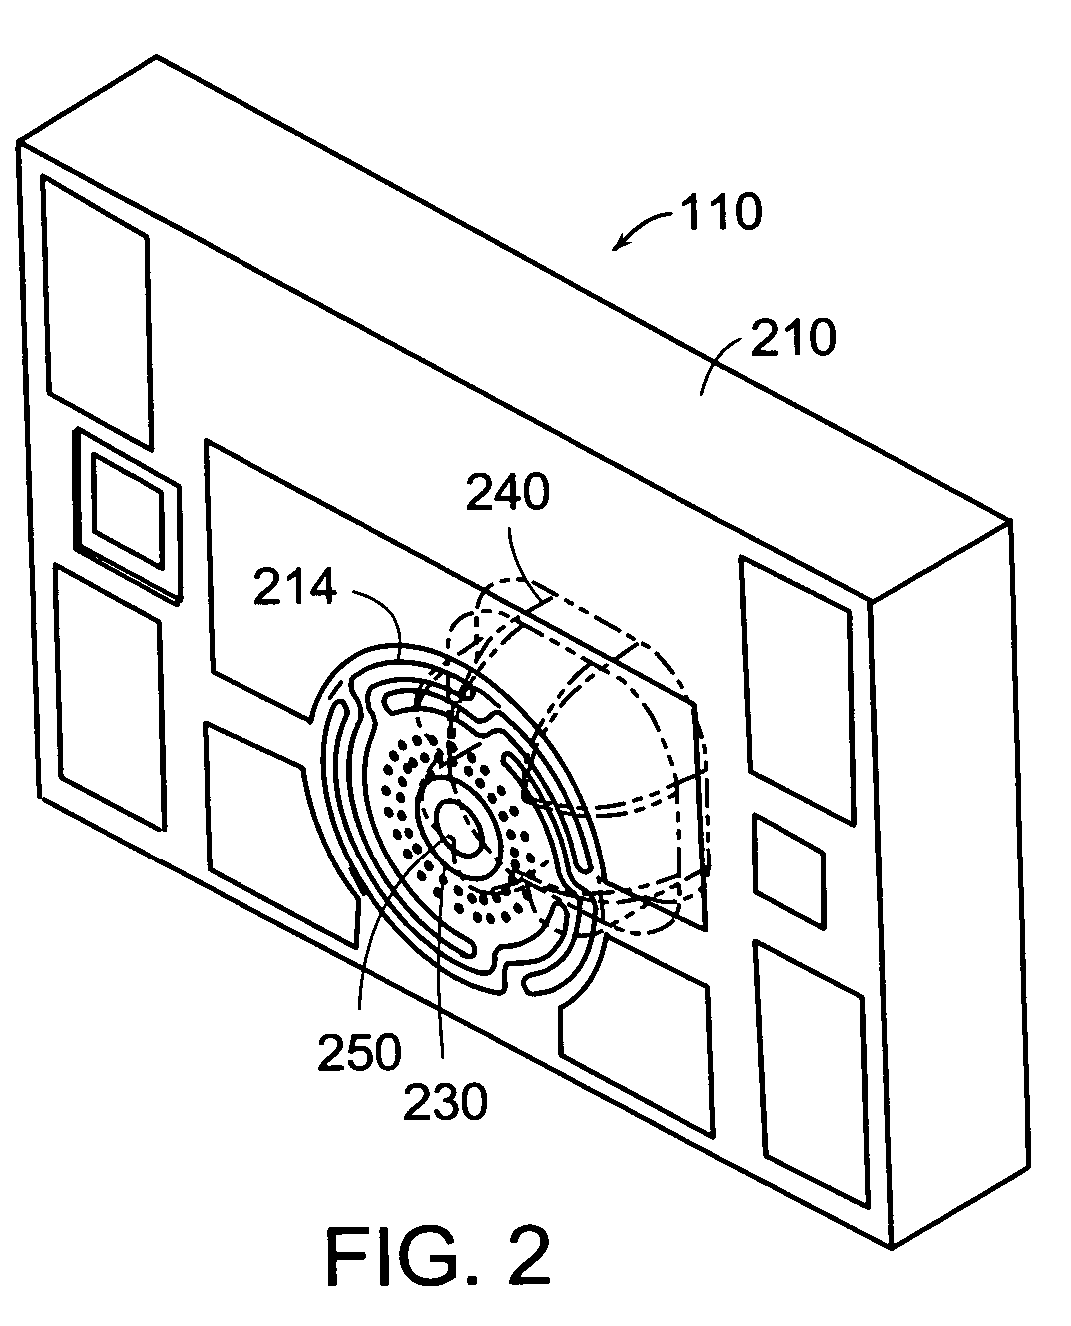 Process for fabricating MEMS membrane with integral mirror/lens